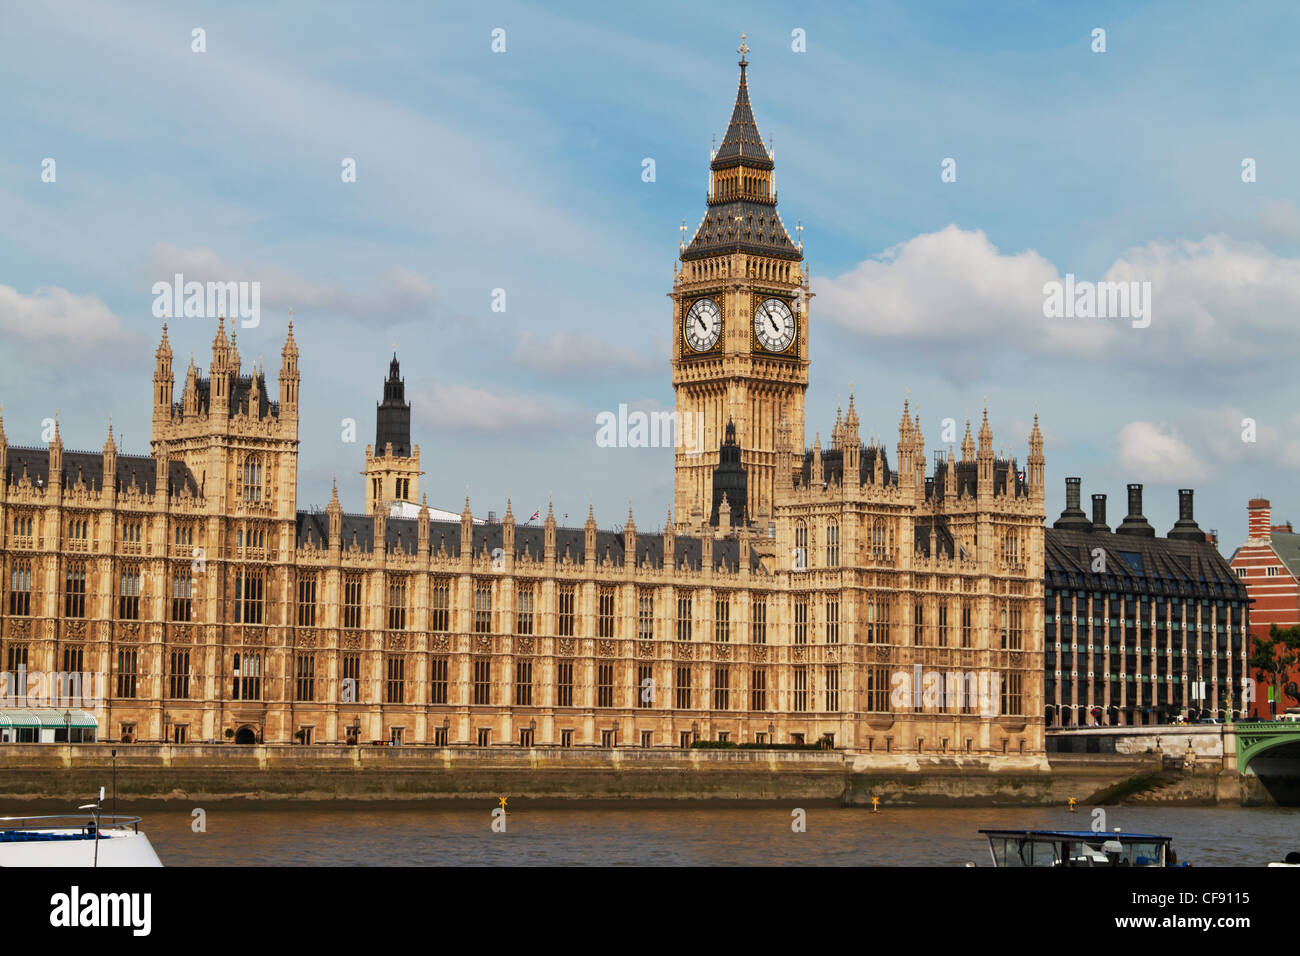 the parliament in london with big ben clock tower Stock Photo